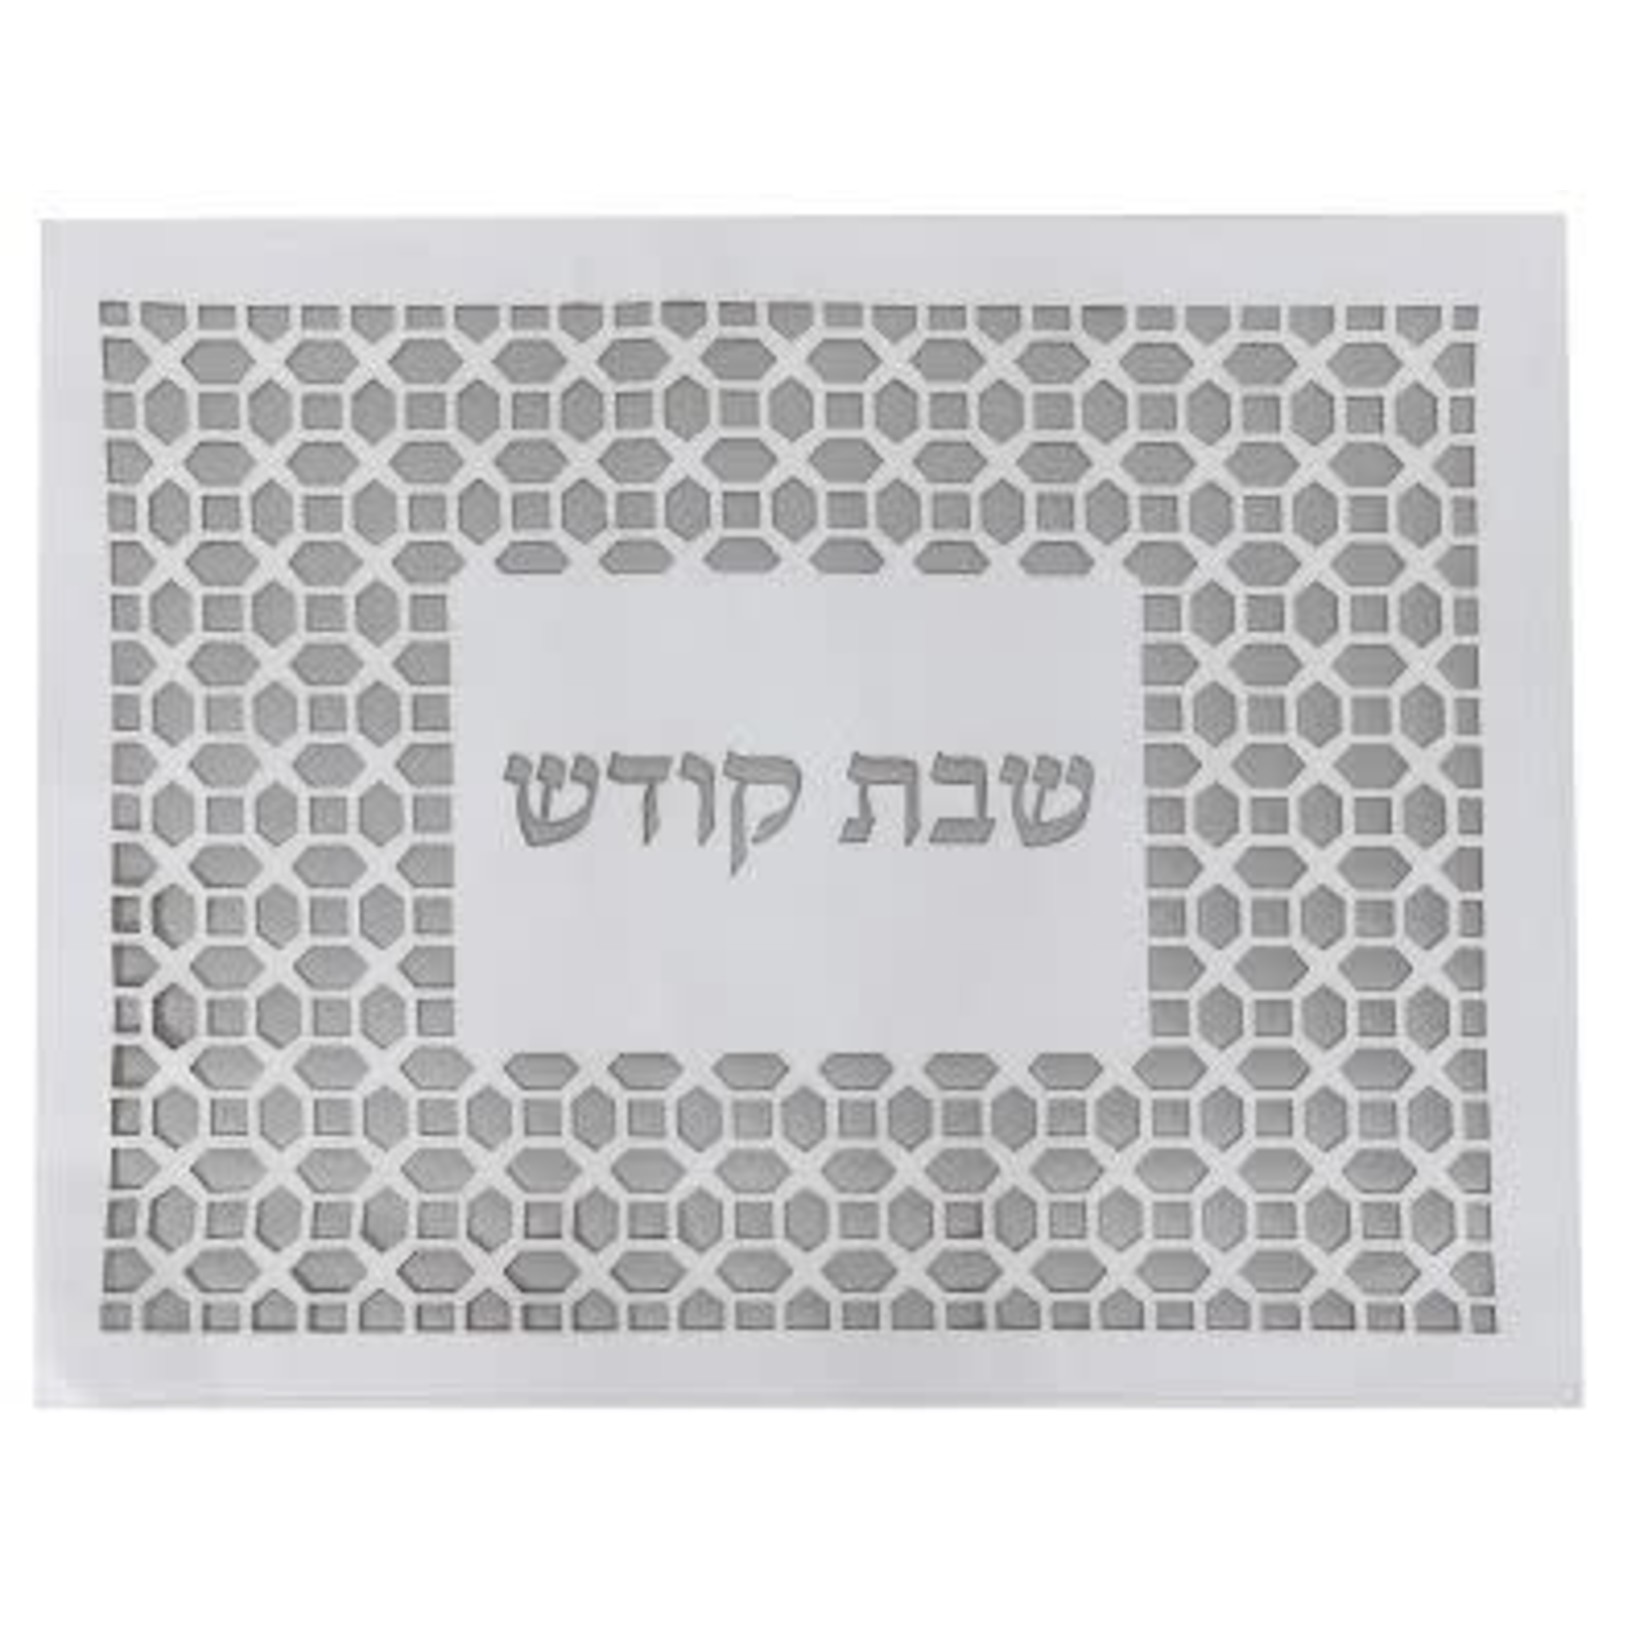 183113 Leather Look Silver & White Design Challah Cover Laser Cut 17.5" X 21.5"